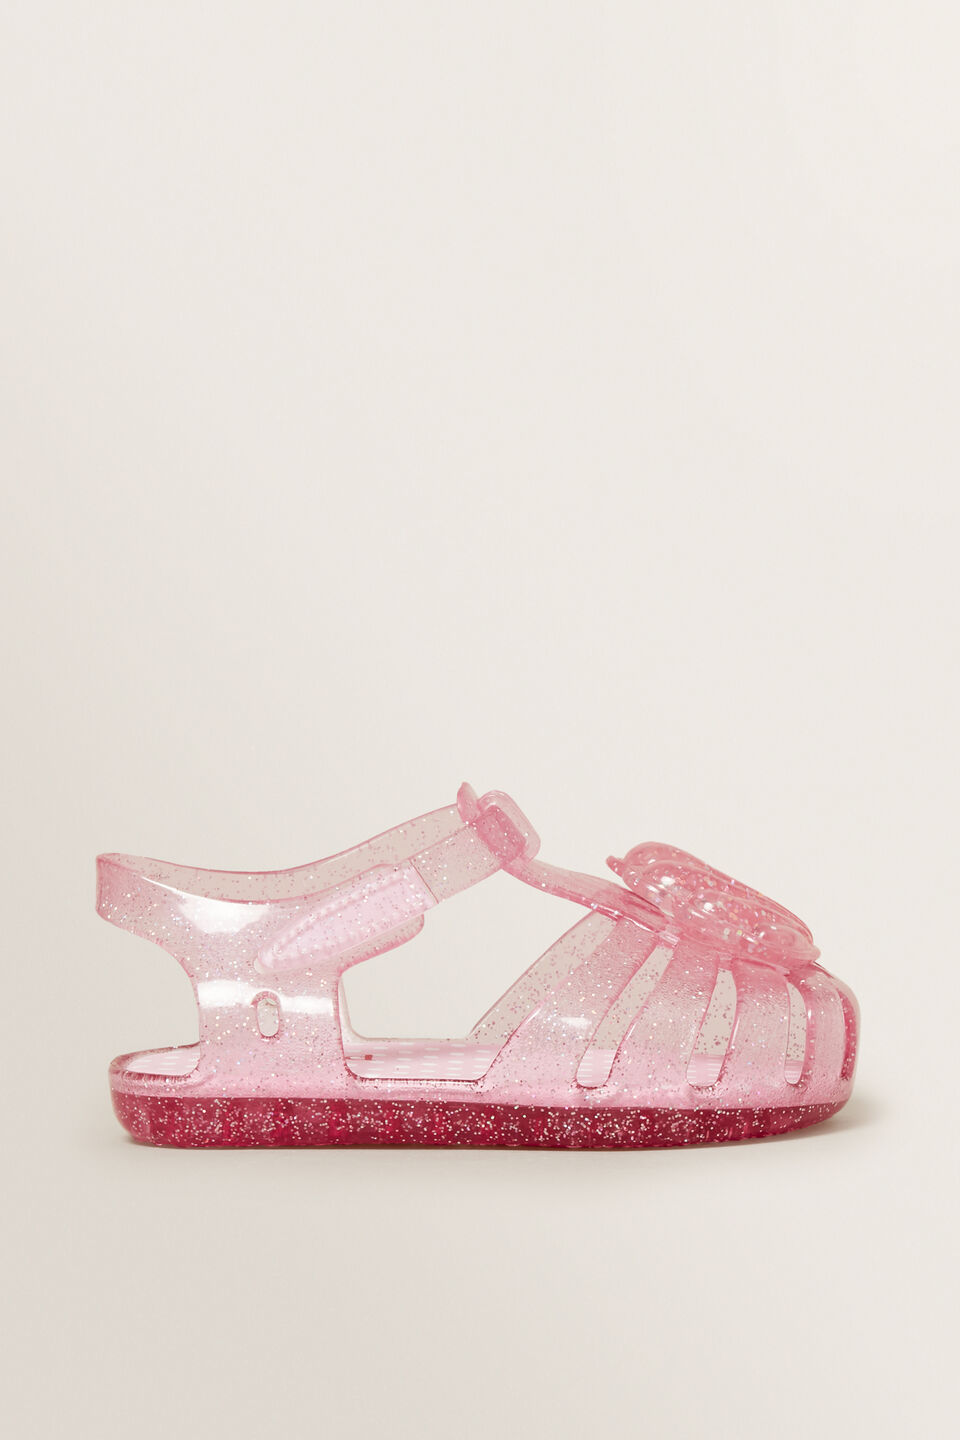 Shell Jelly Sandals  